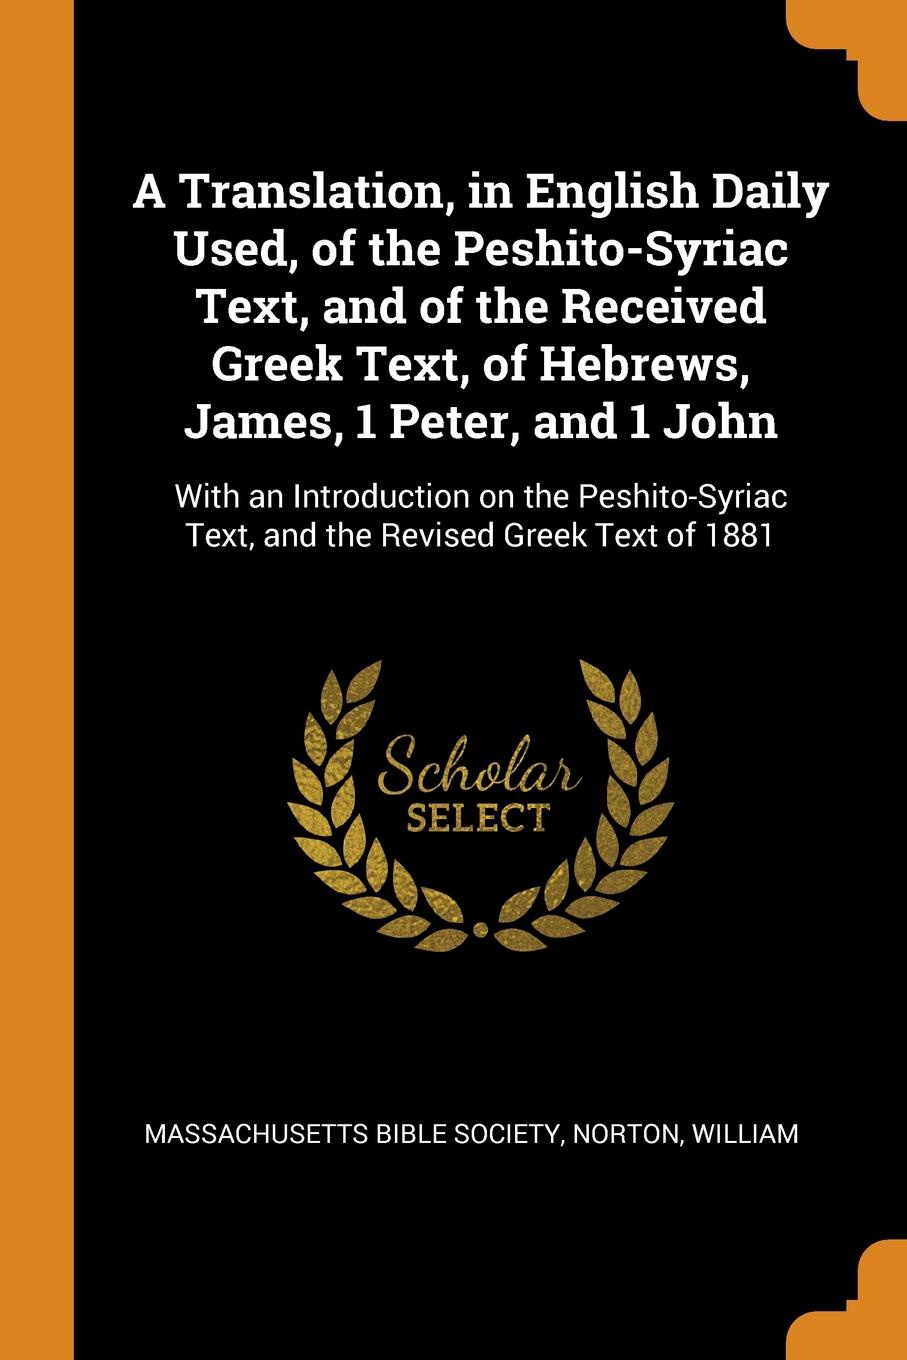 A Translation, in English Daily Used, of the Peshito-Syriac Text, and of the Received Greek Text, of Hebrews, James, 1 Peter, and 1 John. With an Introduction on the Peshito-Syriac Text, and the Revised Greek Text of 1881